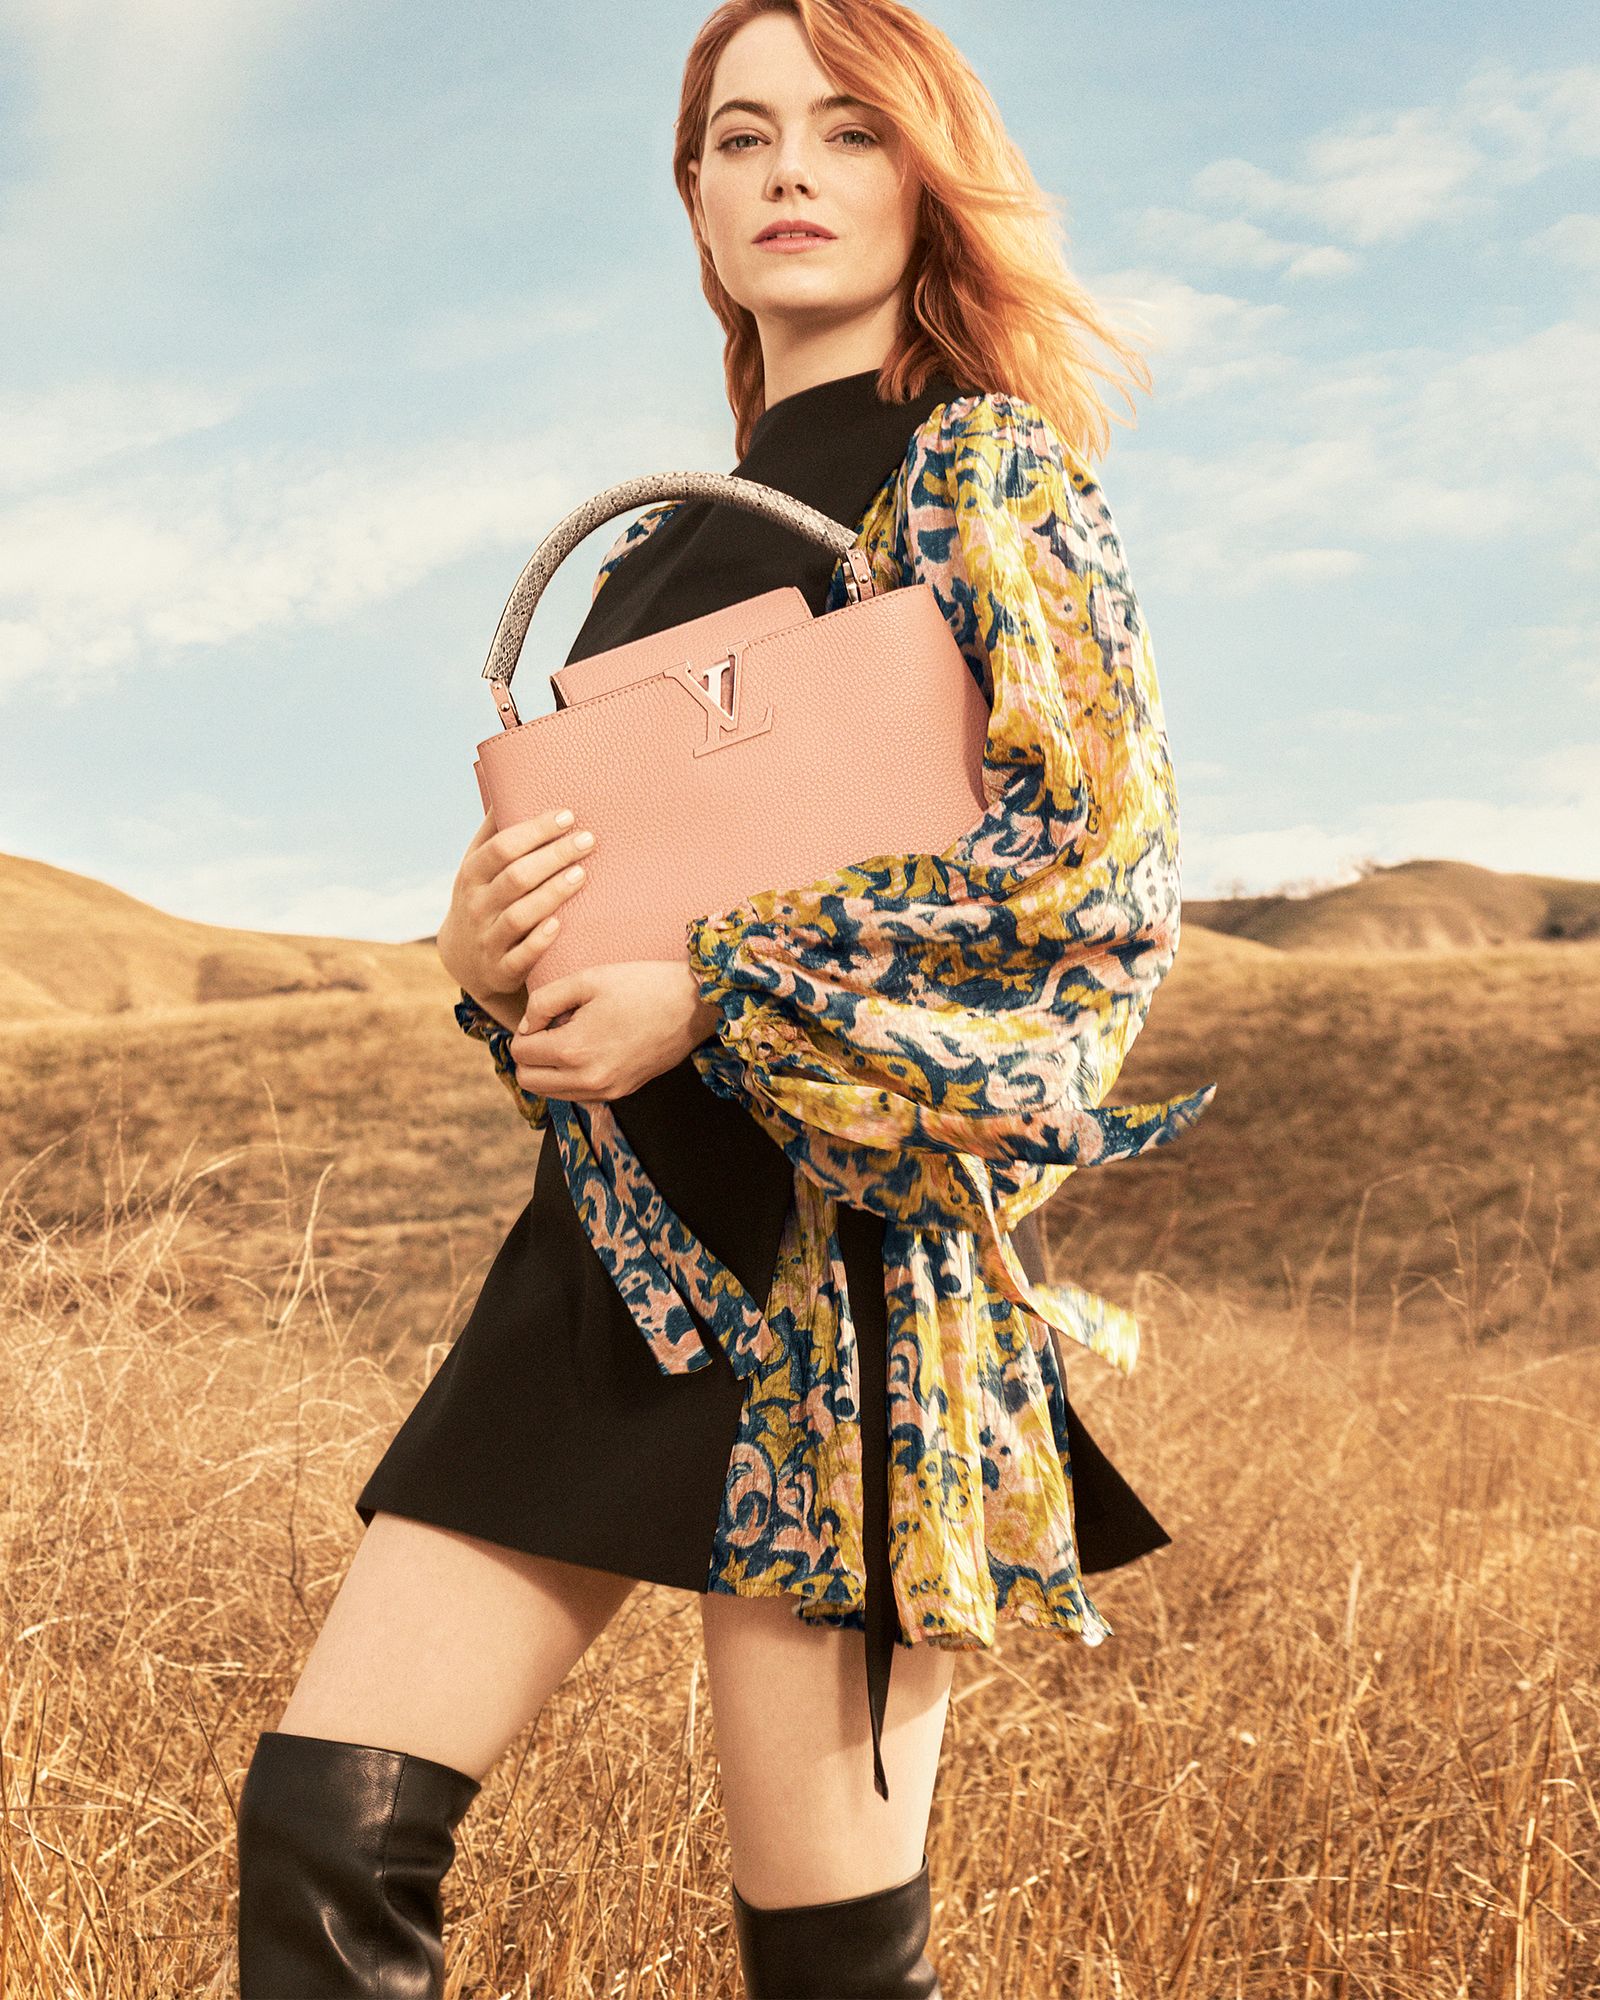 Louis Vuitton The Spirit Of Travel Pre-Fall 2018 with Emma Stone Campaign